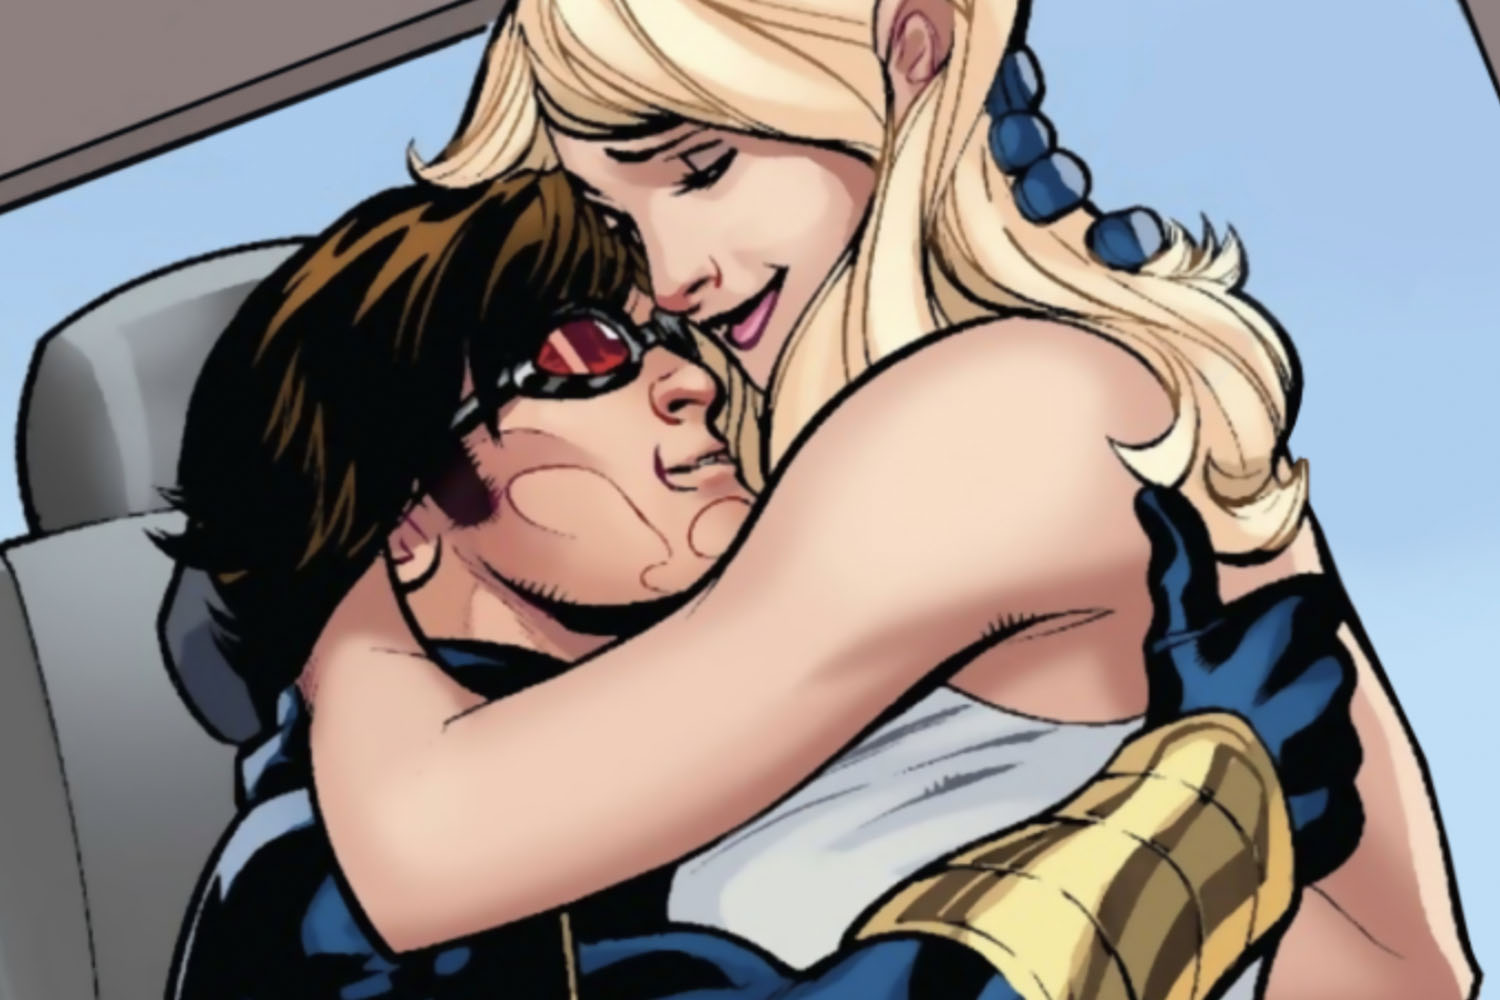 Love and mutants: The best stories of the Scott Summers-Emma Frost romance